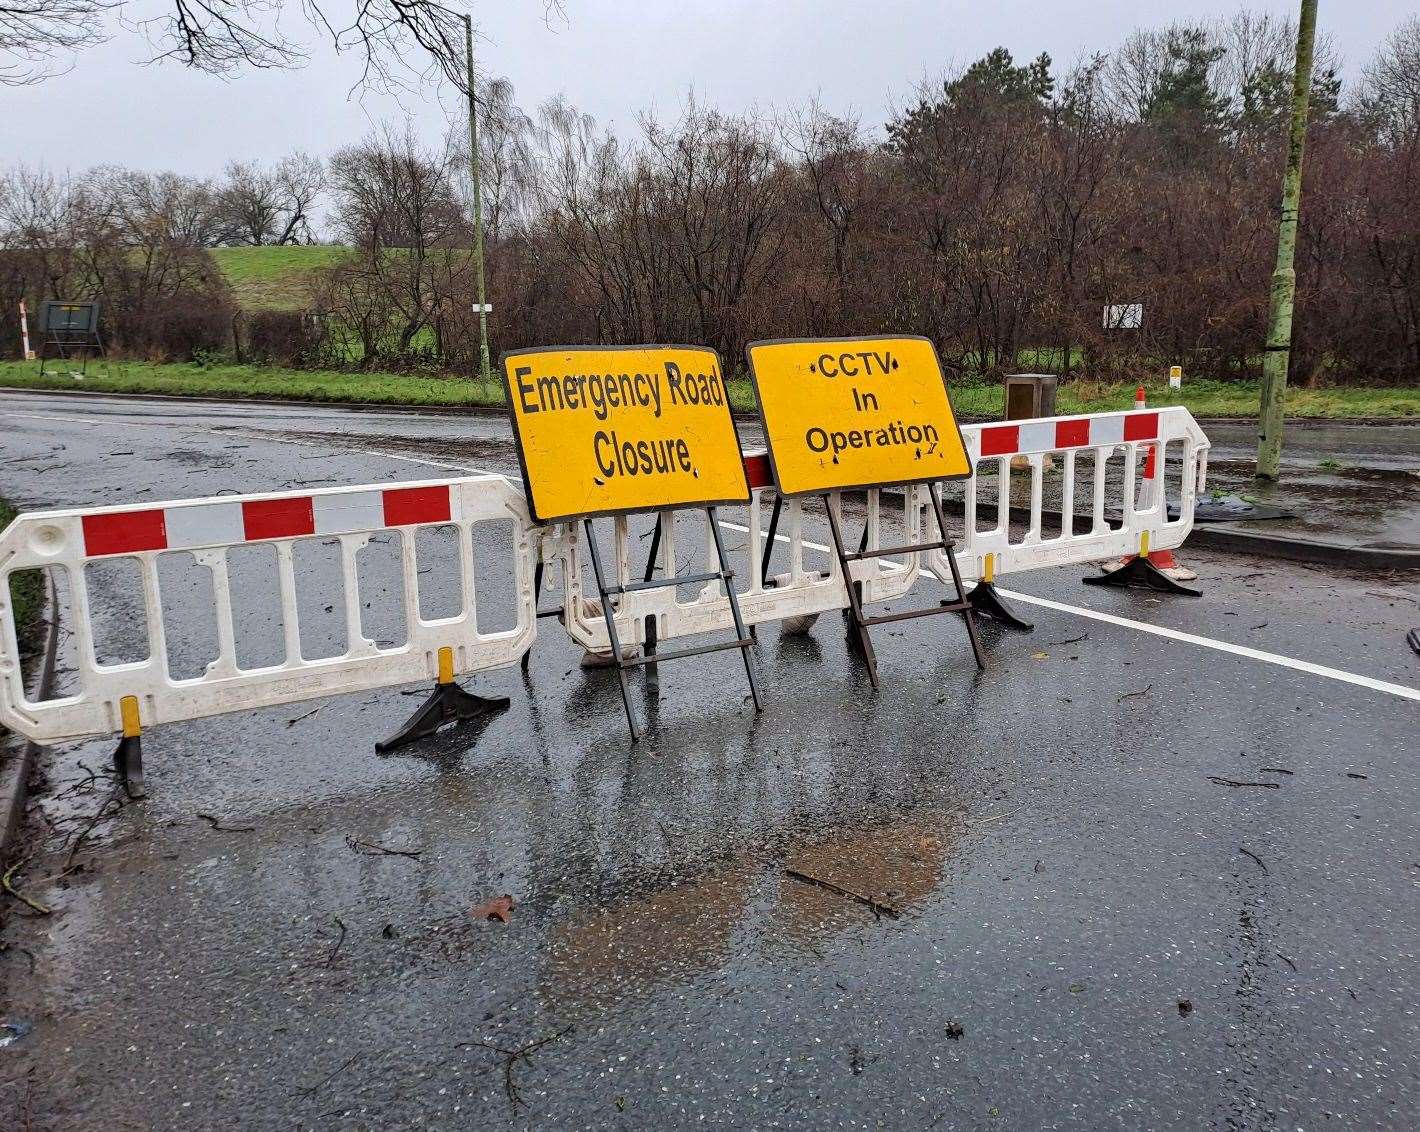 There is also significant damage to the surface of the road, which needs to be repaired. Picture: Ross Waldron